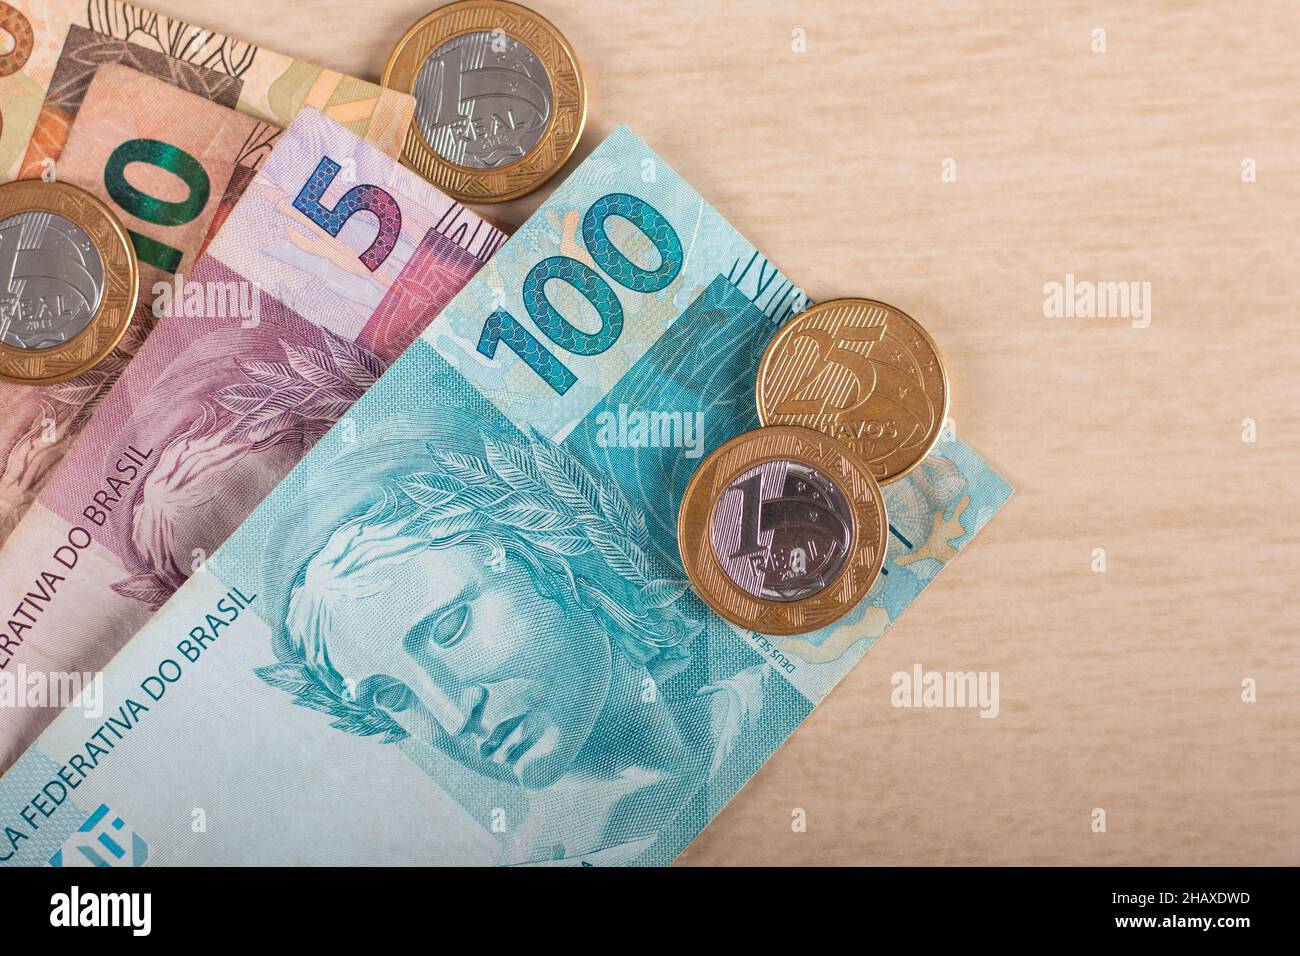 Real currency, money from Brazil. Real banknotes with Brazilian currency. Stock Photo